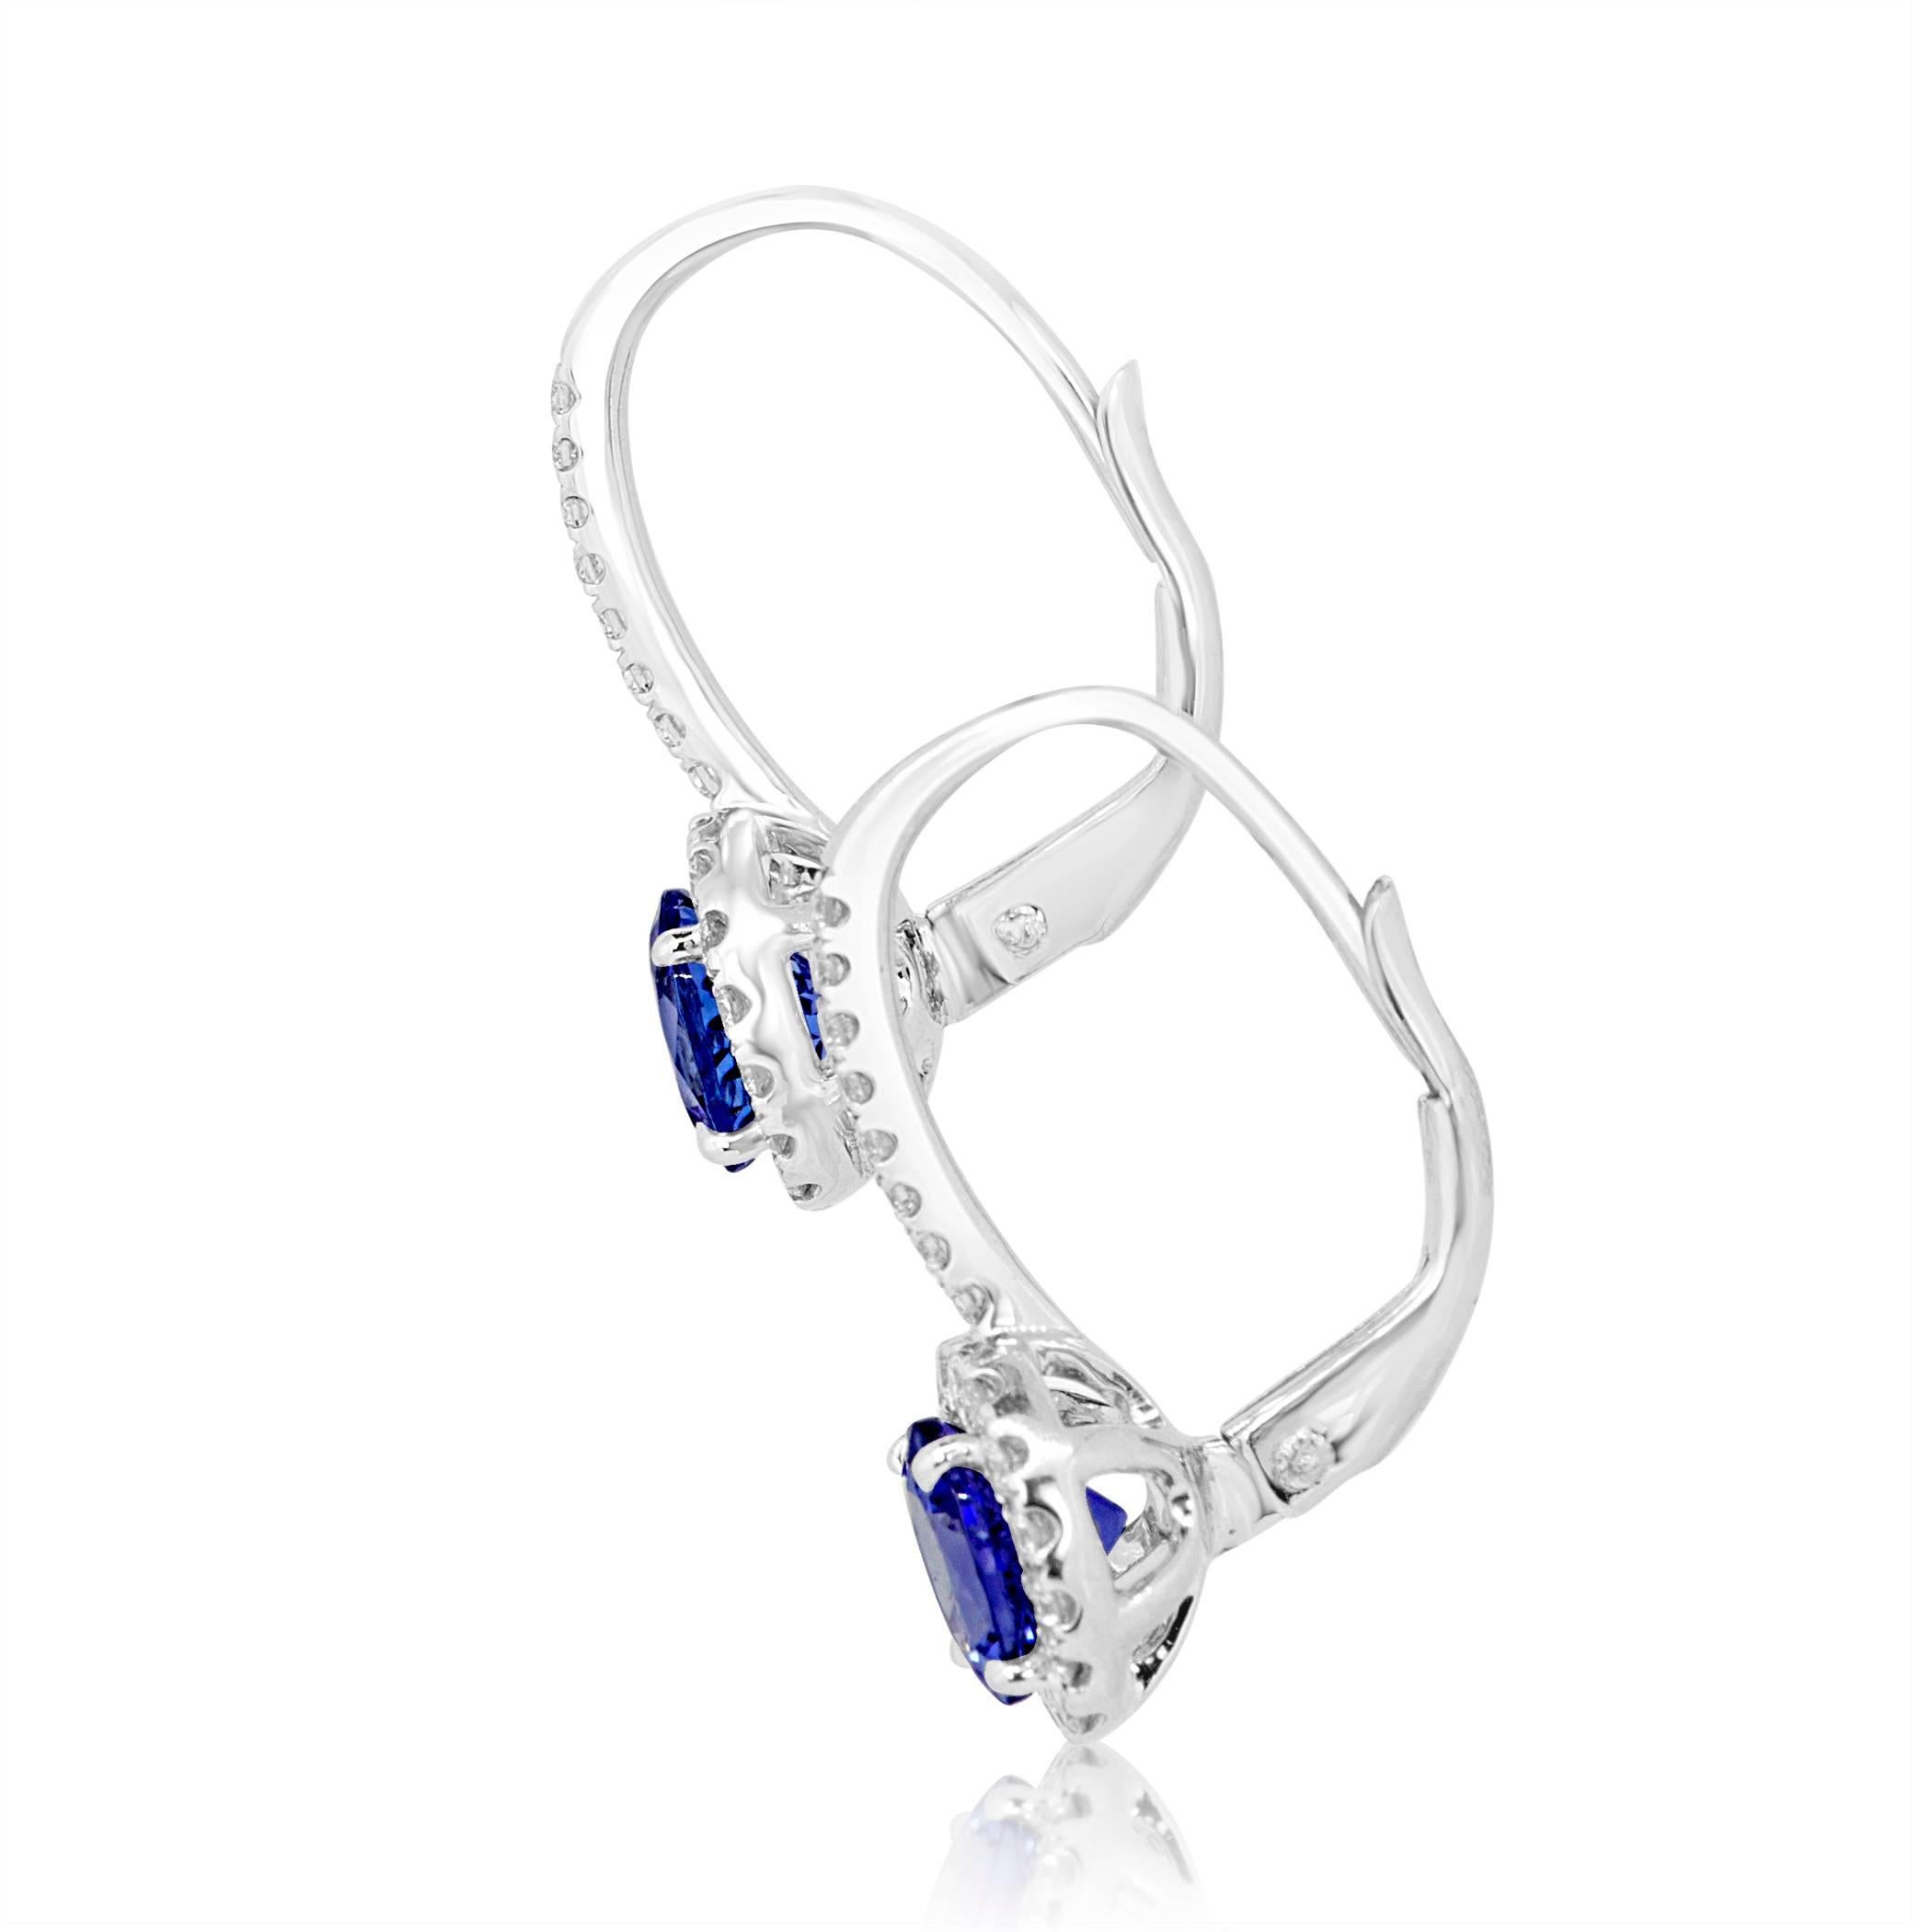 2 Tanzanite Round 2.38 Carat encircled in Halo Whited Diamond 0.50 Carat 14K White Gold Dangle Earring with French Lock.

Style available in different price ranges. Prices are based on your selection of 4C's Cut, Color, Carat, Clarity. Please